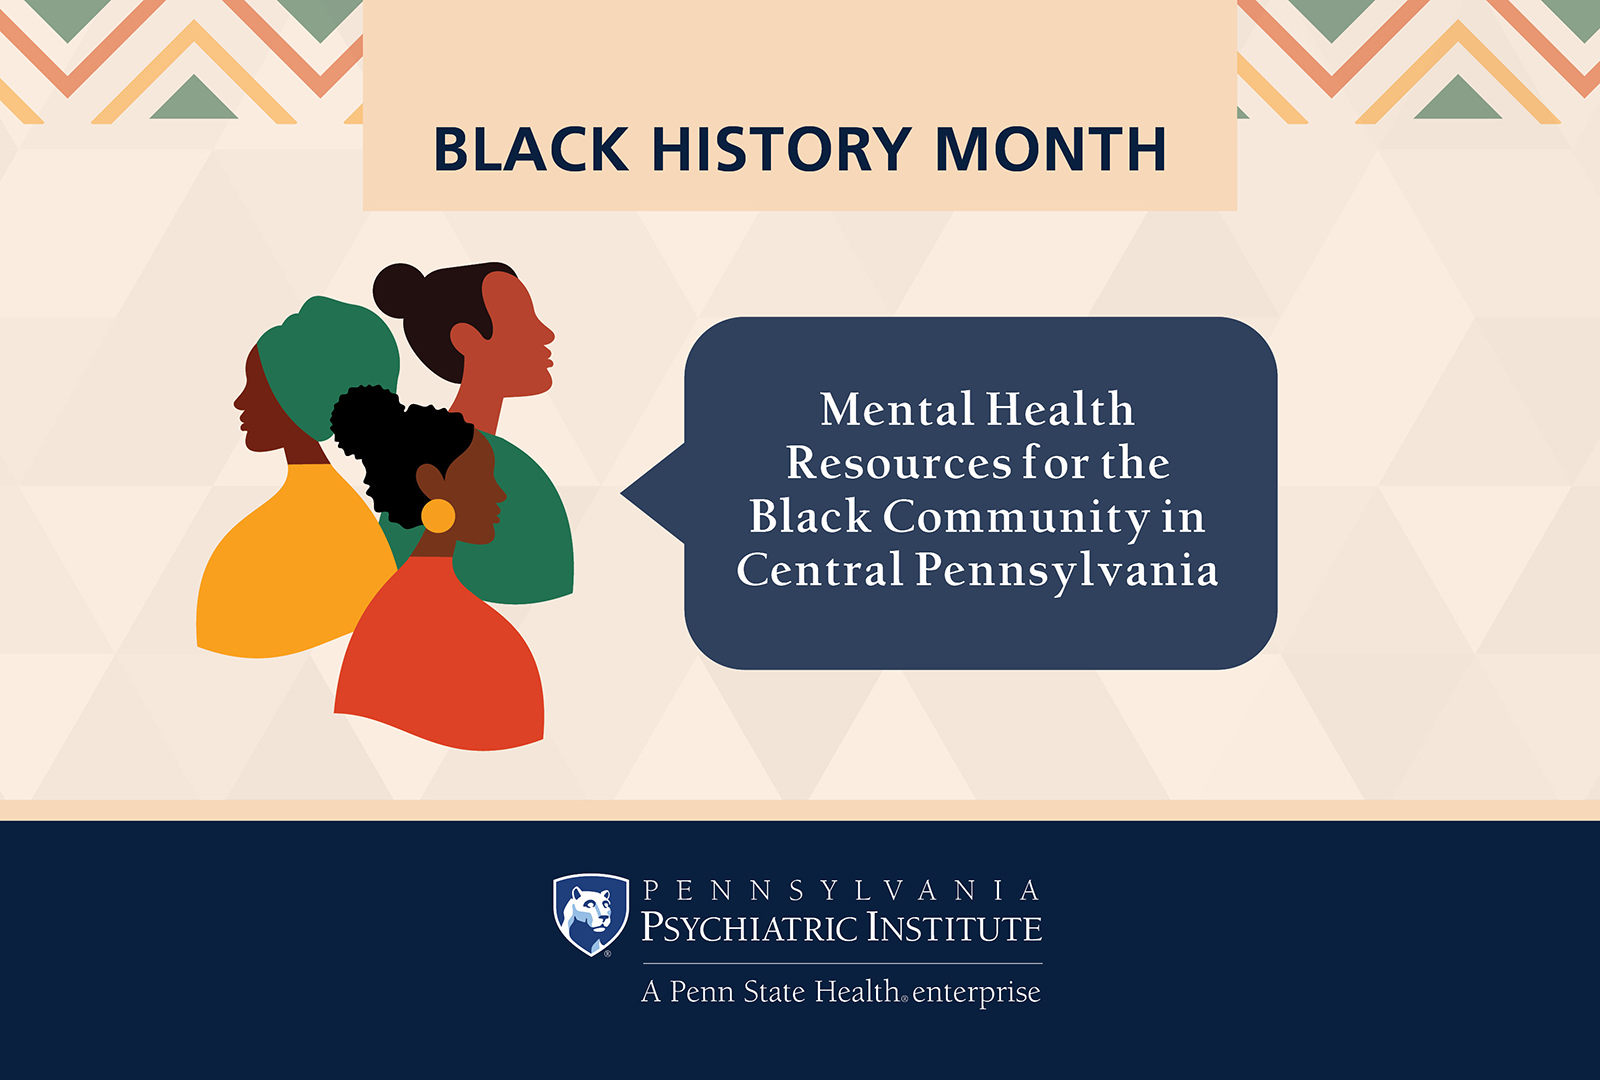 Black History Month: Mental Health Resources for the Black Community in Central Pennsylvania